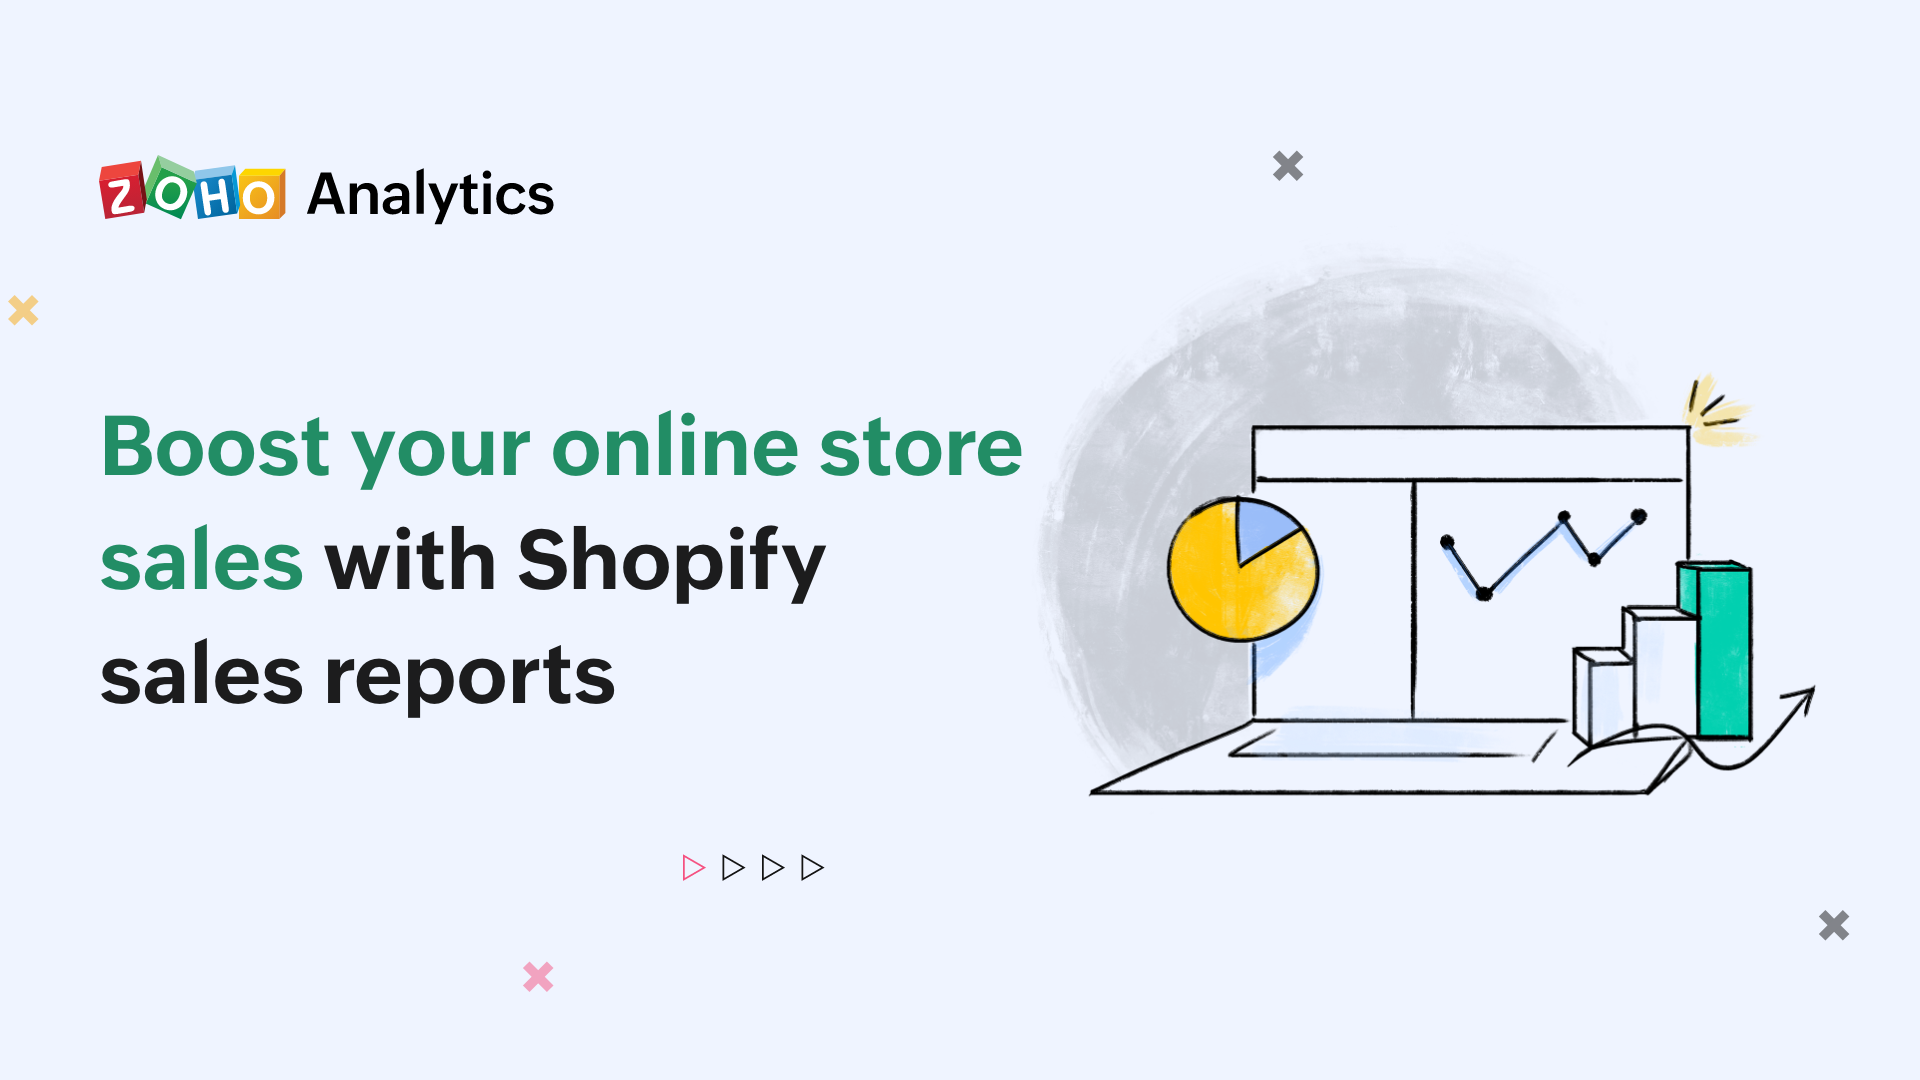 Boost your online store sales with Shopify sales reports